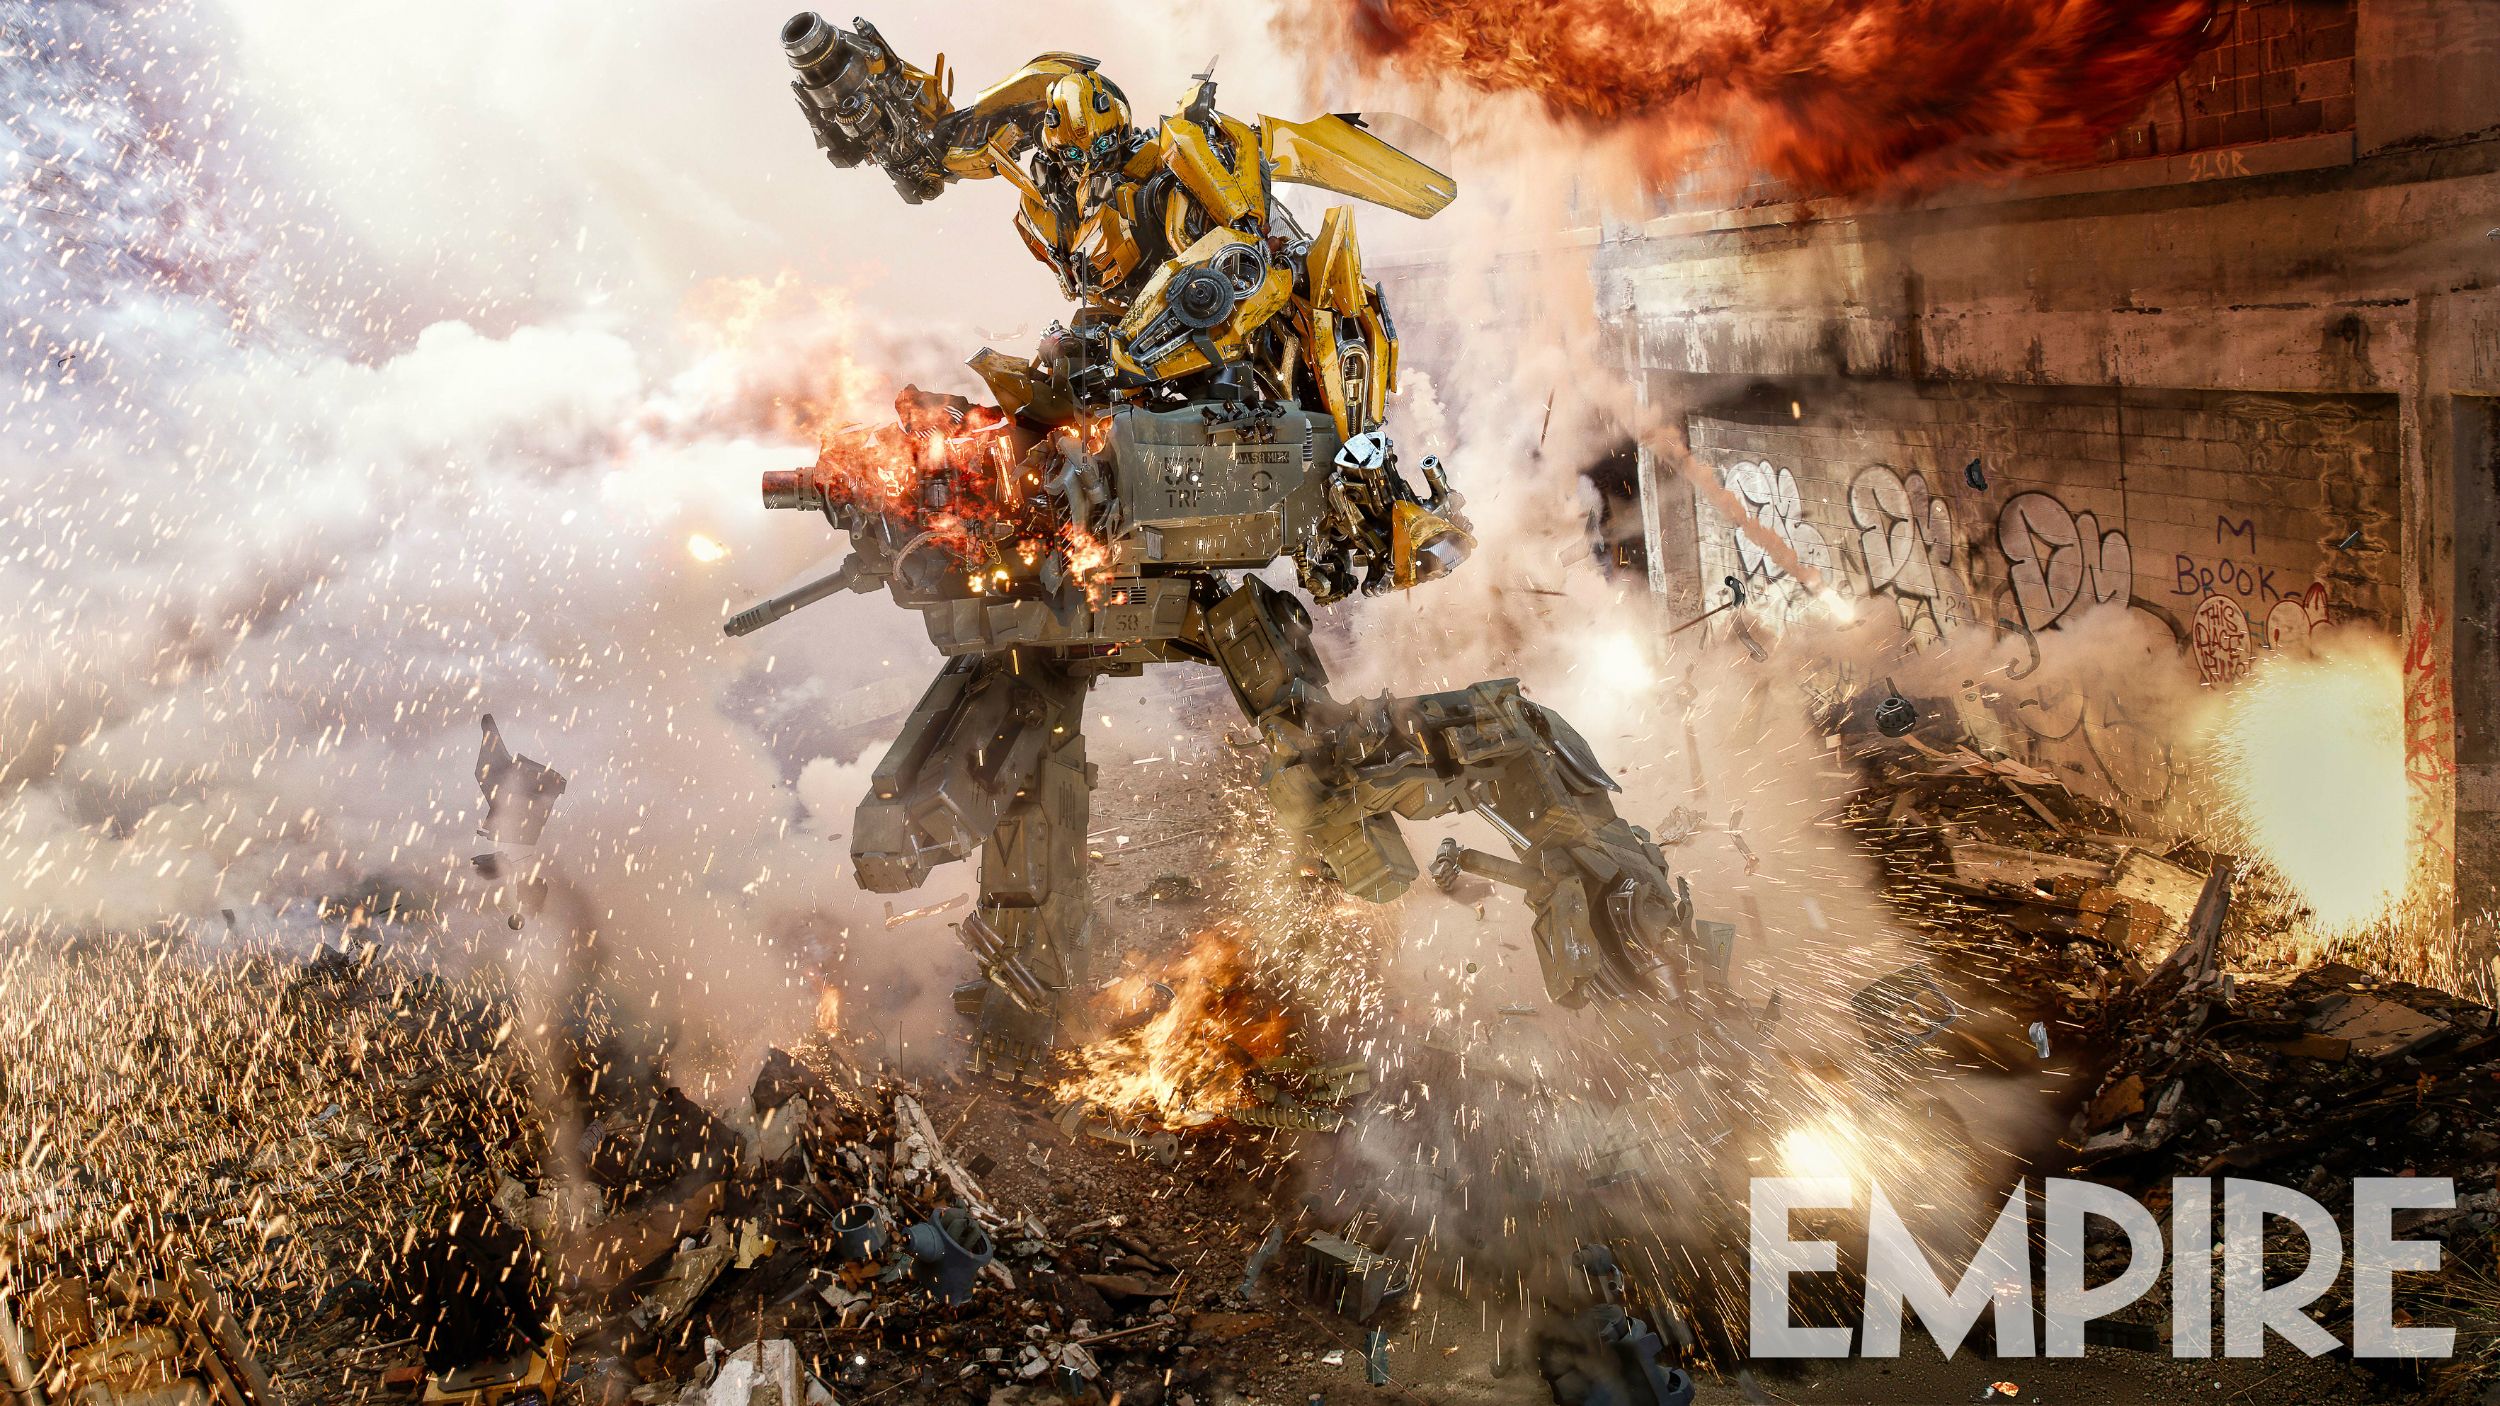 Bumblebee Lays the Smackdown in New Transformers 5 Image